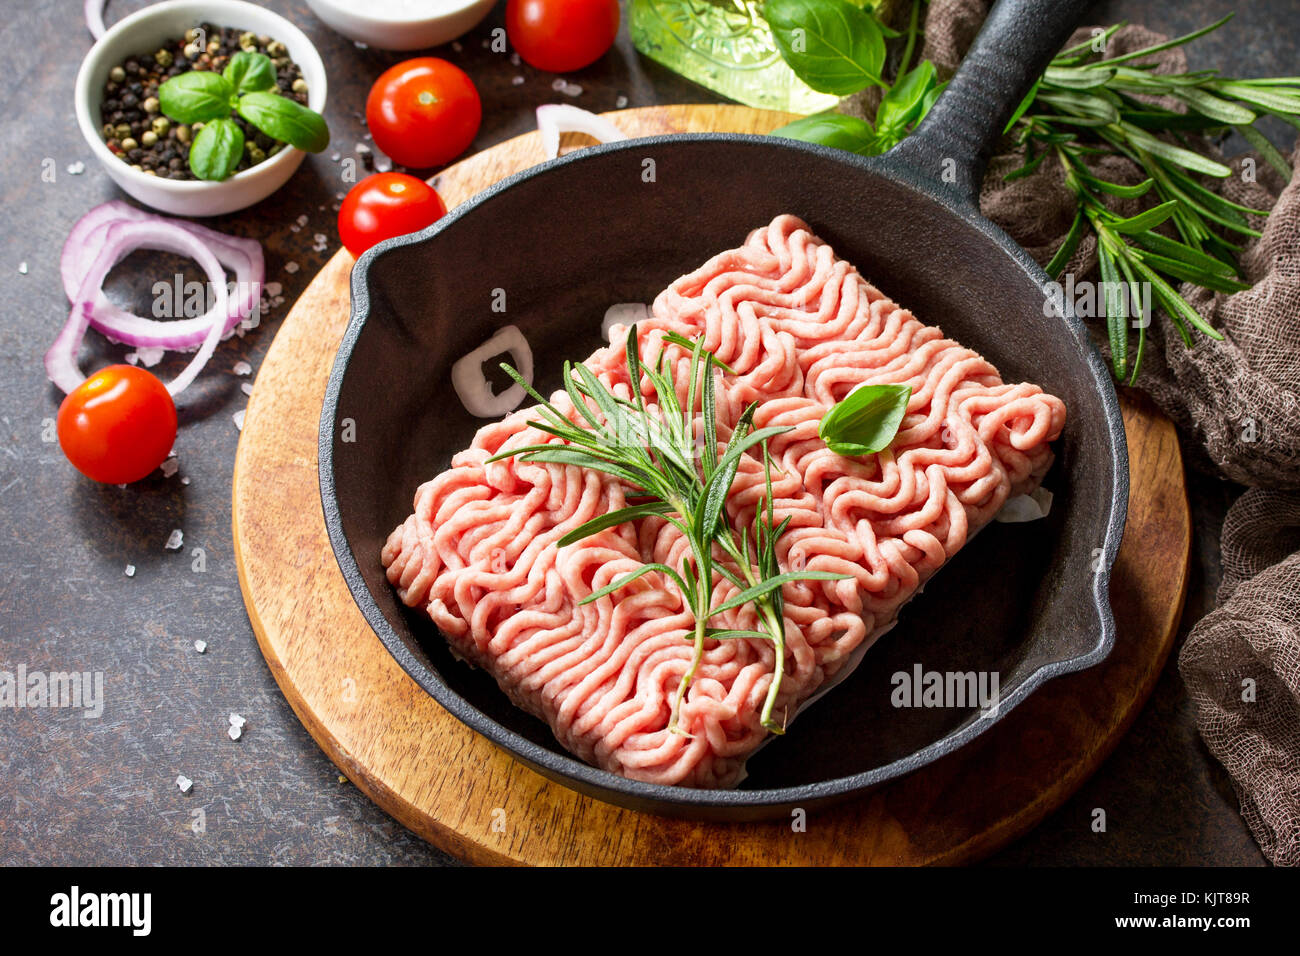 Raw minced beef on a cast iron frying pan, and a variety of spices, vegetables and herbs. Stock Photo